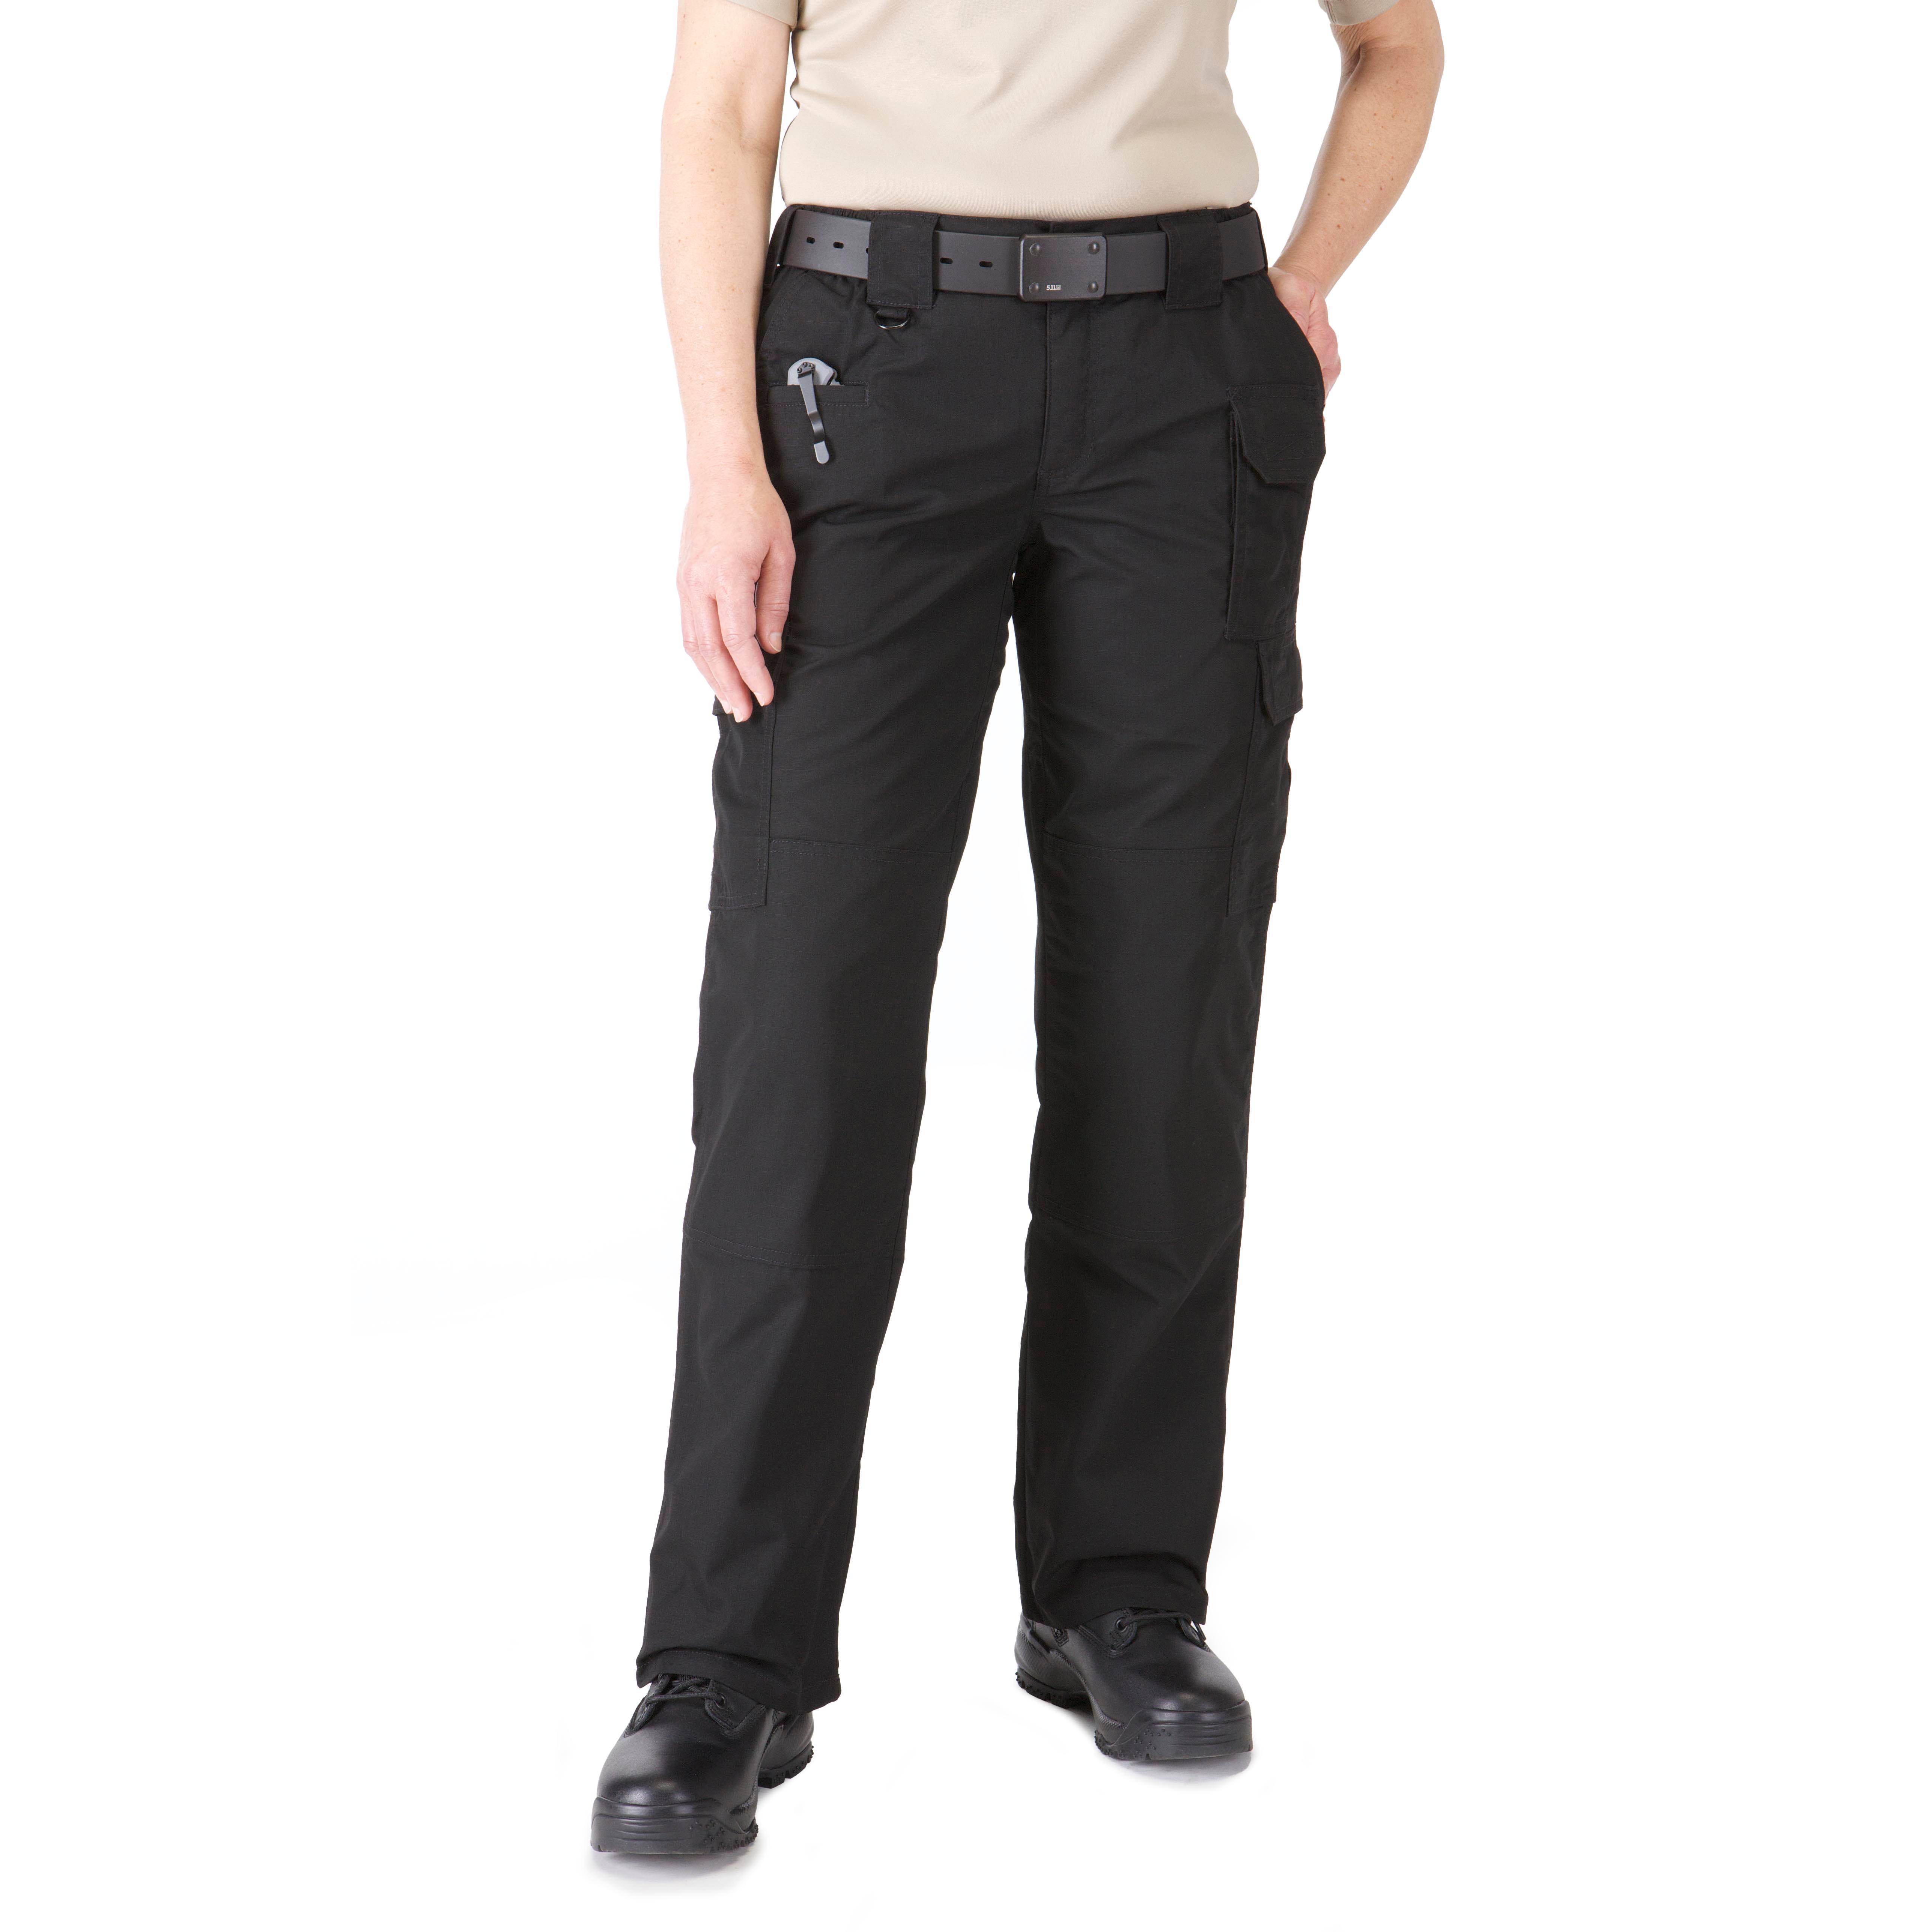 5.11 tactical trousers